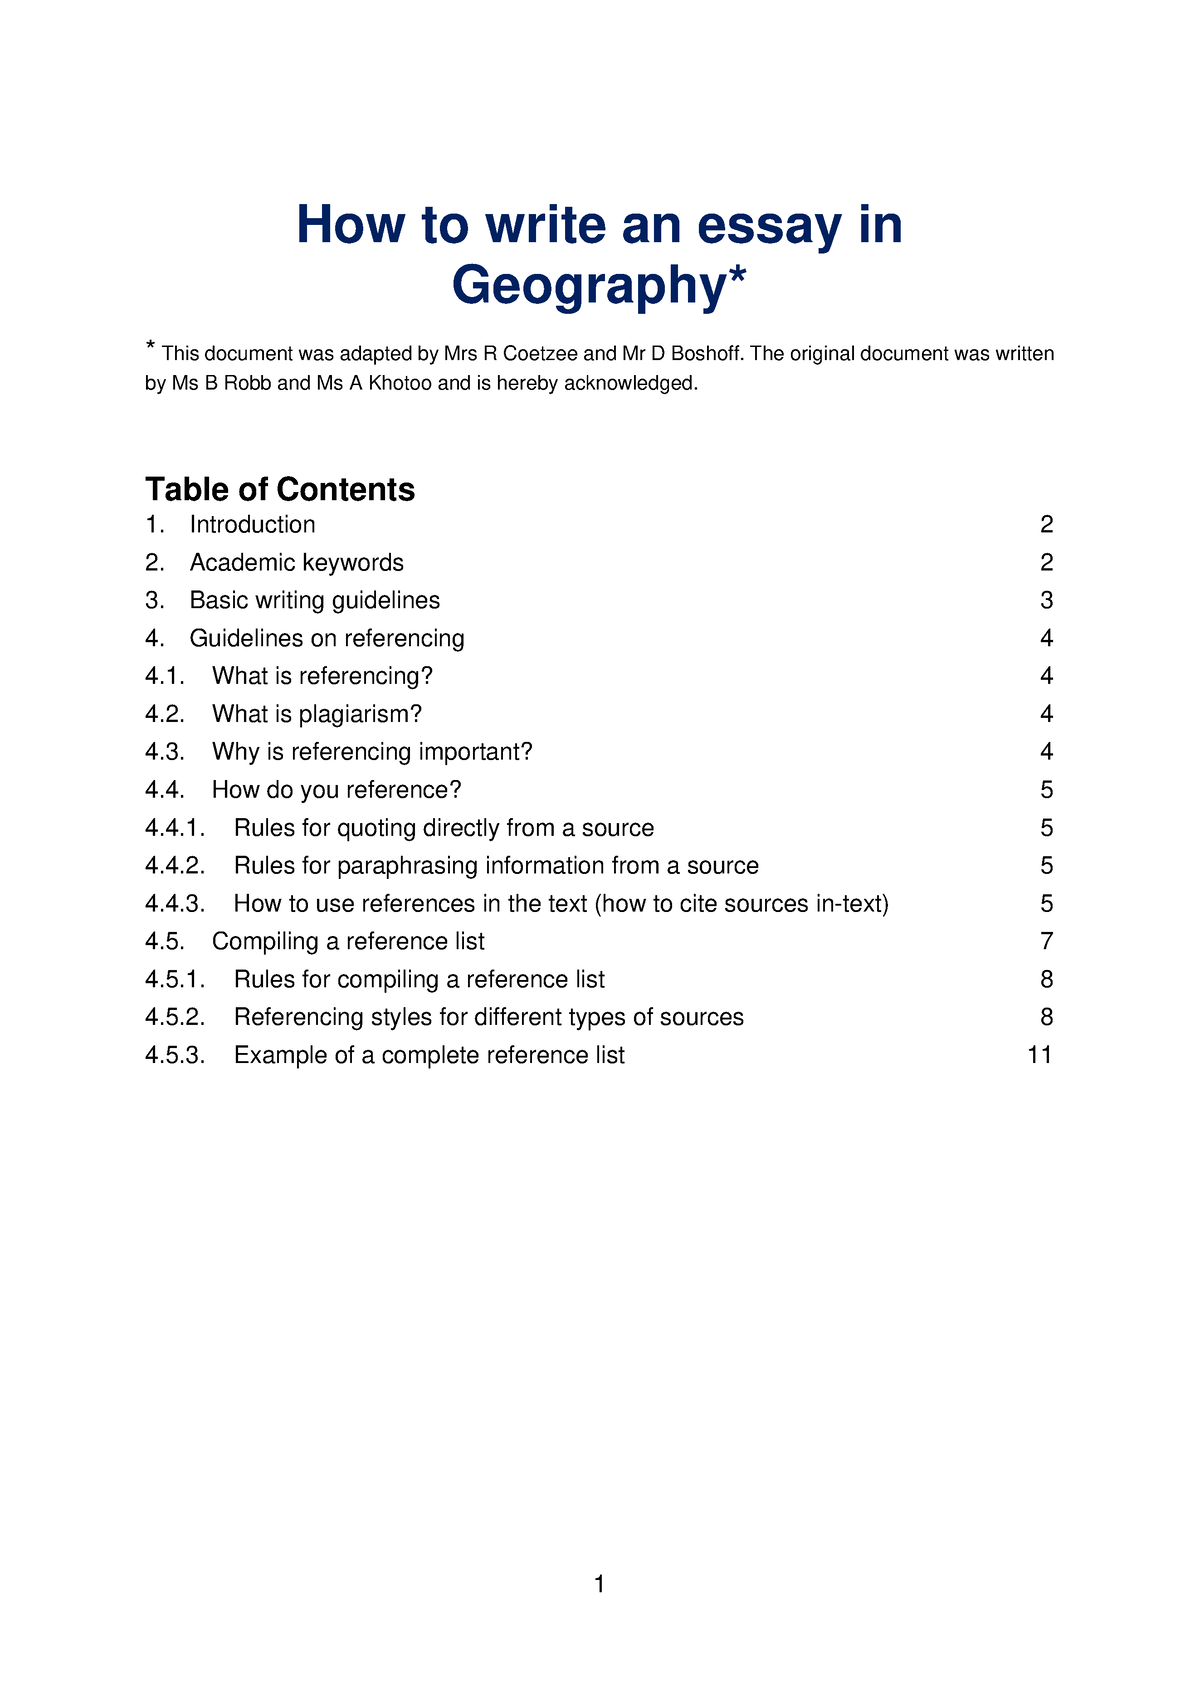 how to write a geography argumentative essay